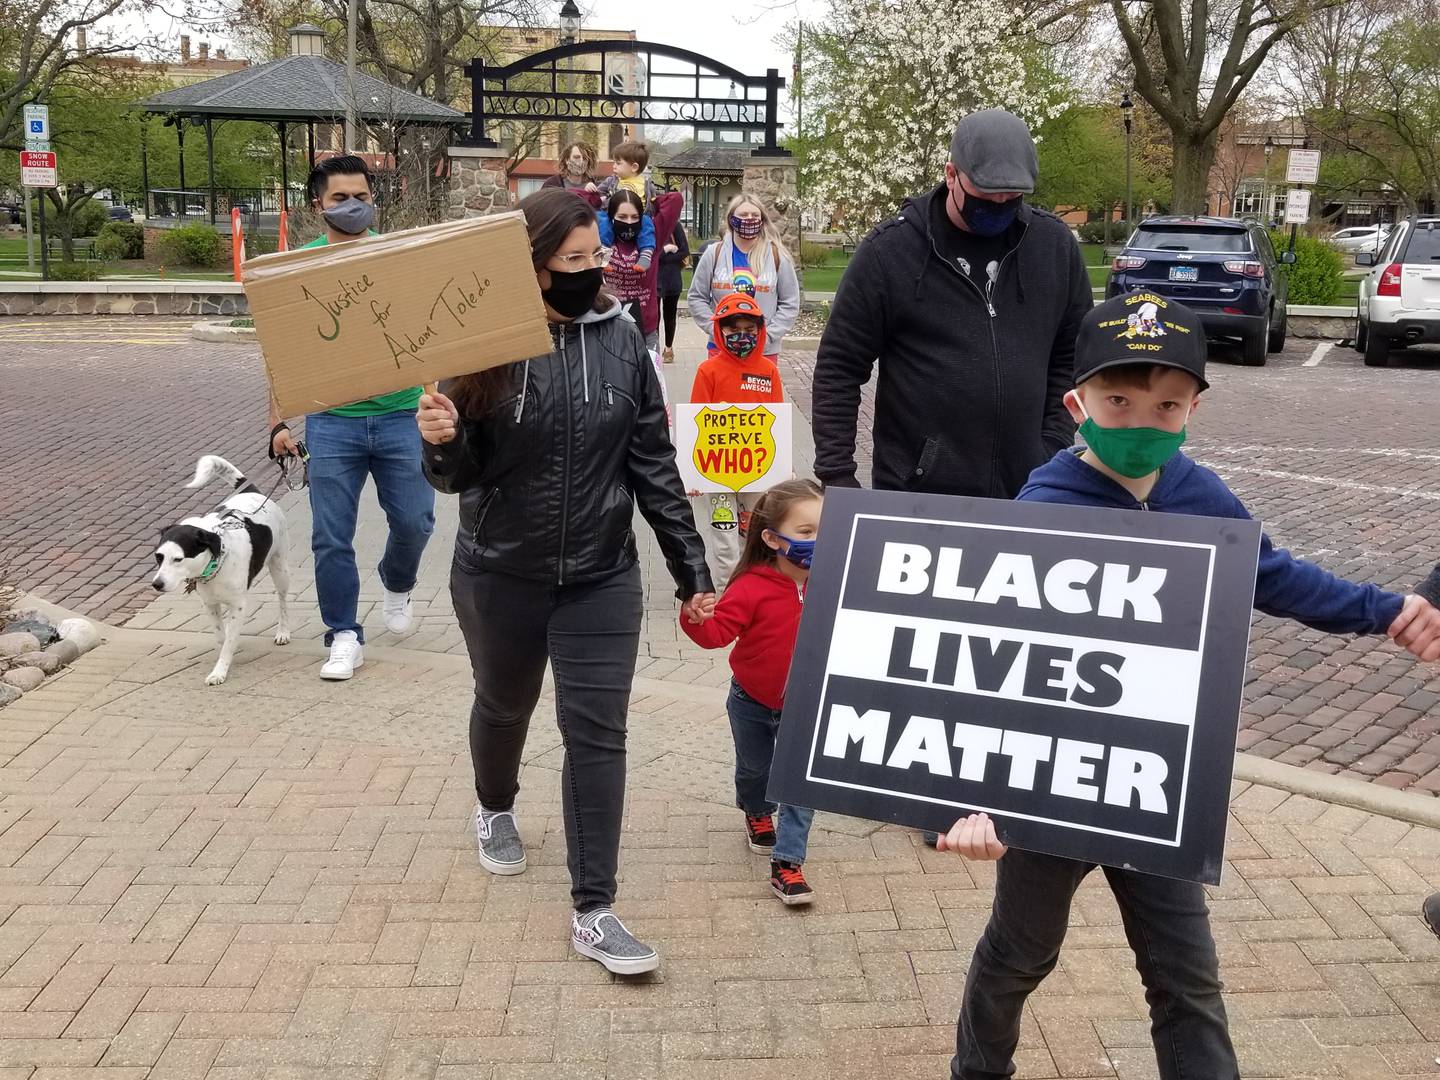 Merrill Hall, 8, was among about 40 people who marched around downtown Woodstock's Historic Square on Sunday, April 18, 2021, to protest police violence against immigrants and people of color.